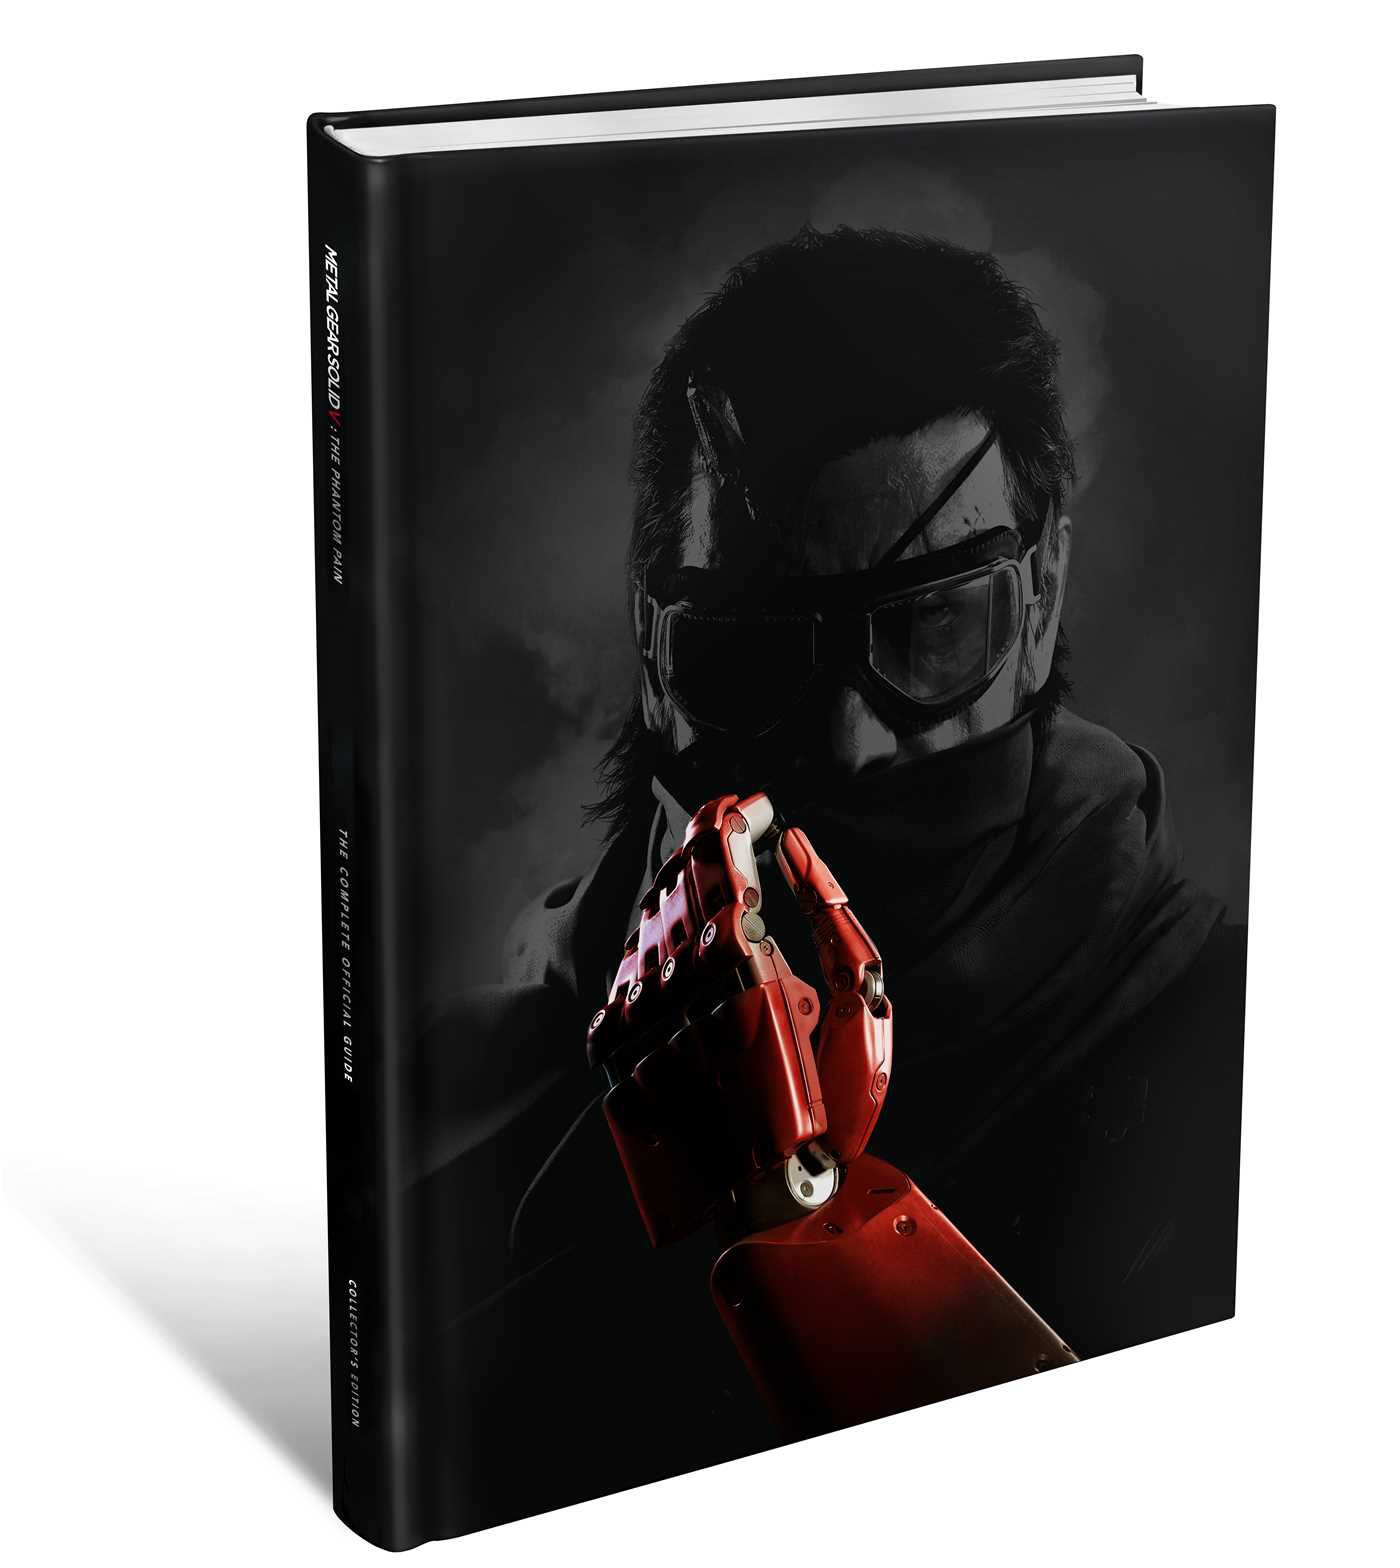 Metal-Gear-Solid-V-The-Phantom-Pain-Piggyback-Collectors-Guide